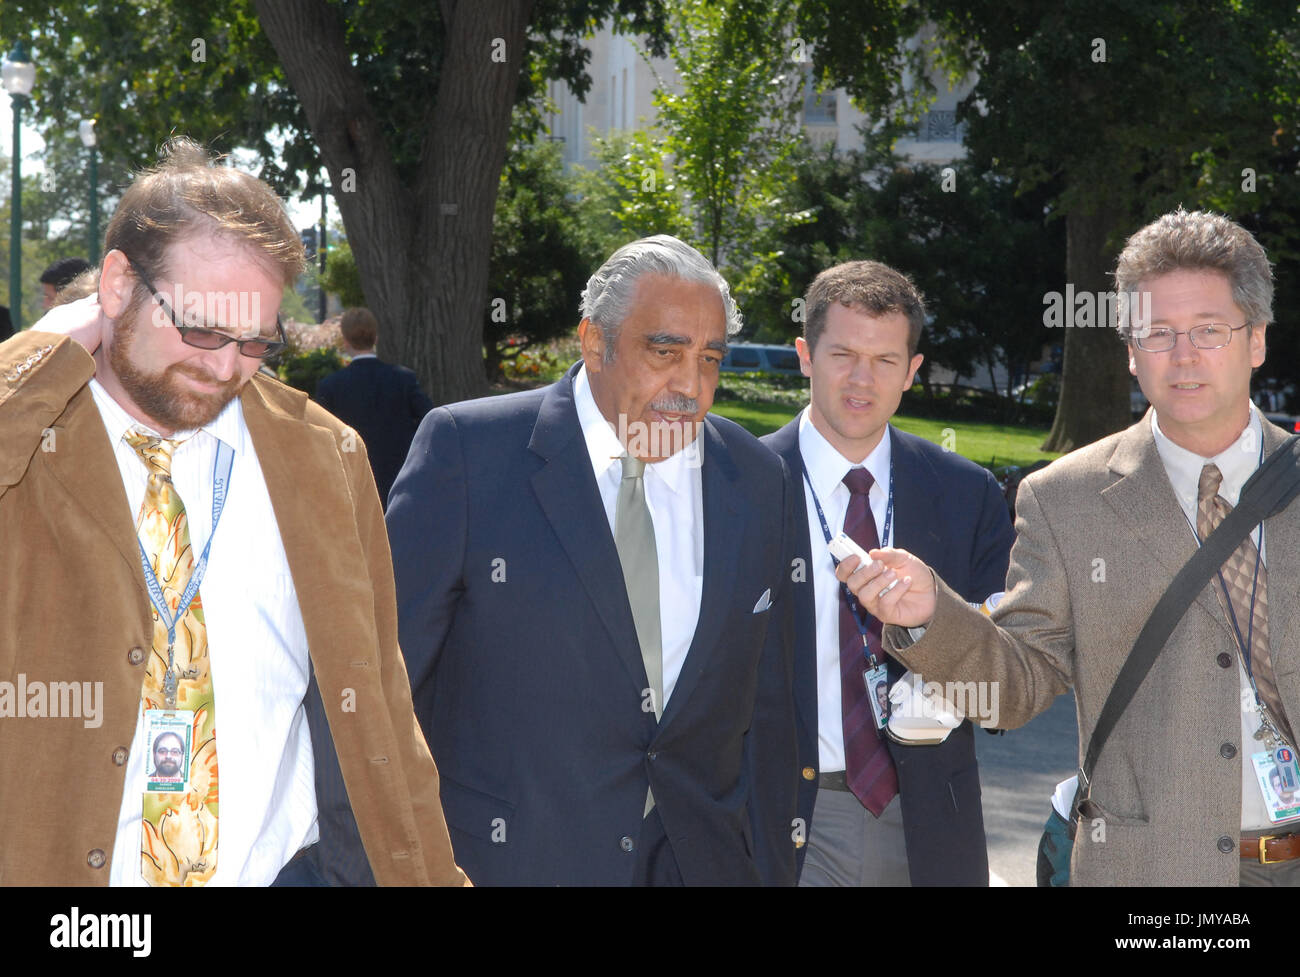 United States Representative Charles Rangel (Democrat of New York) is accompanied by reporters as he walks to a vote in the United States Capitol after calling a recess in a hearing of the United States House Ways and Means Committee on "Policy Options to Prevent Climate Change" in the Longworth House Office Building in Washington, D.C. on Thursday, September 18, 2008..Credit: Ron Sachs / CNP Stock Photo